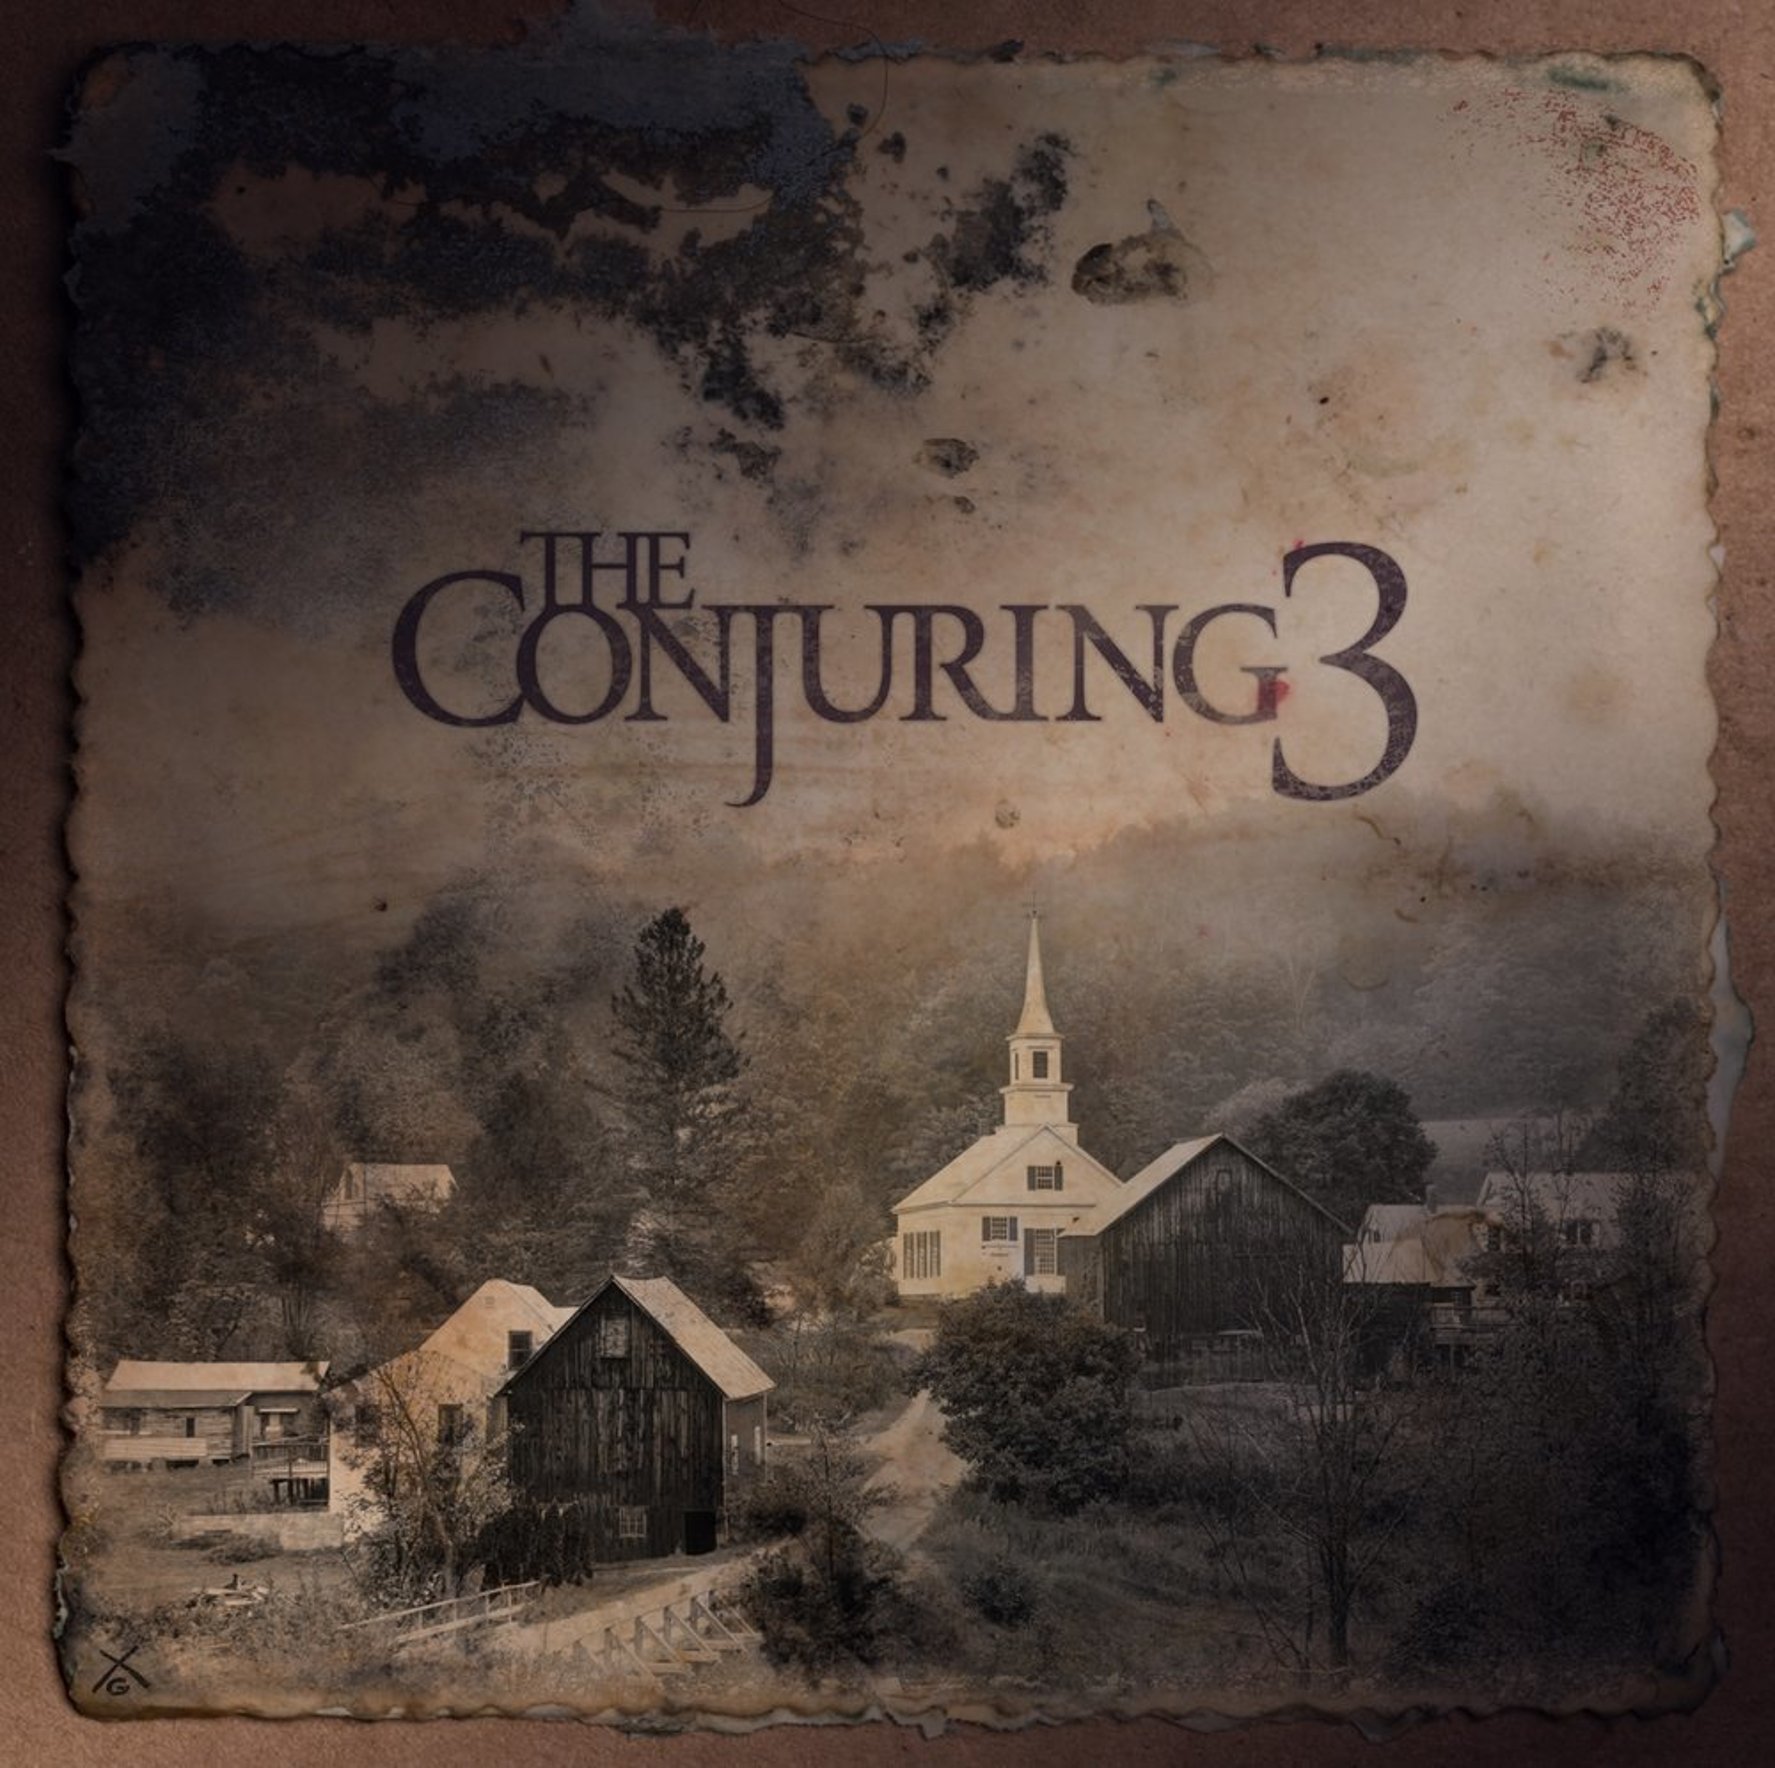 The Conjuring 3 Casting Multiple Roles!